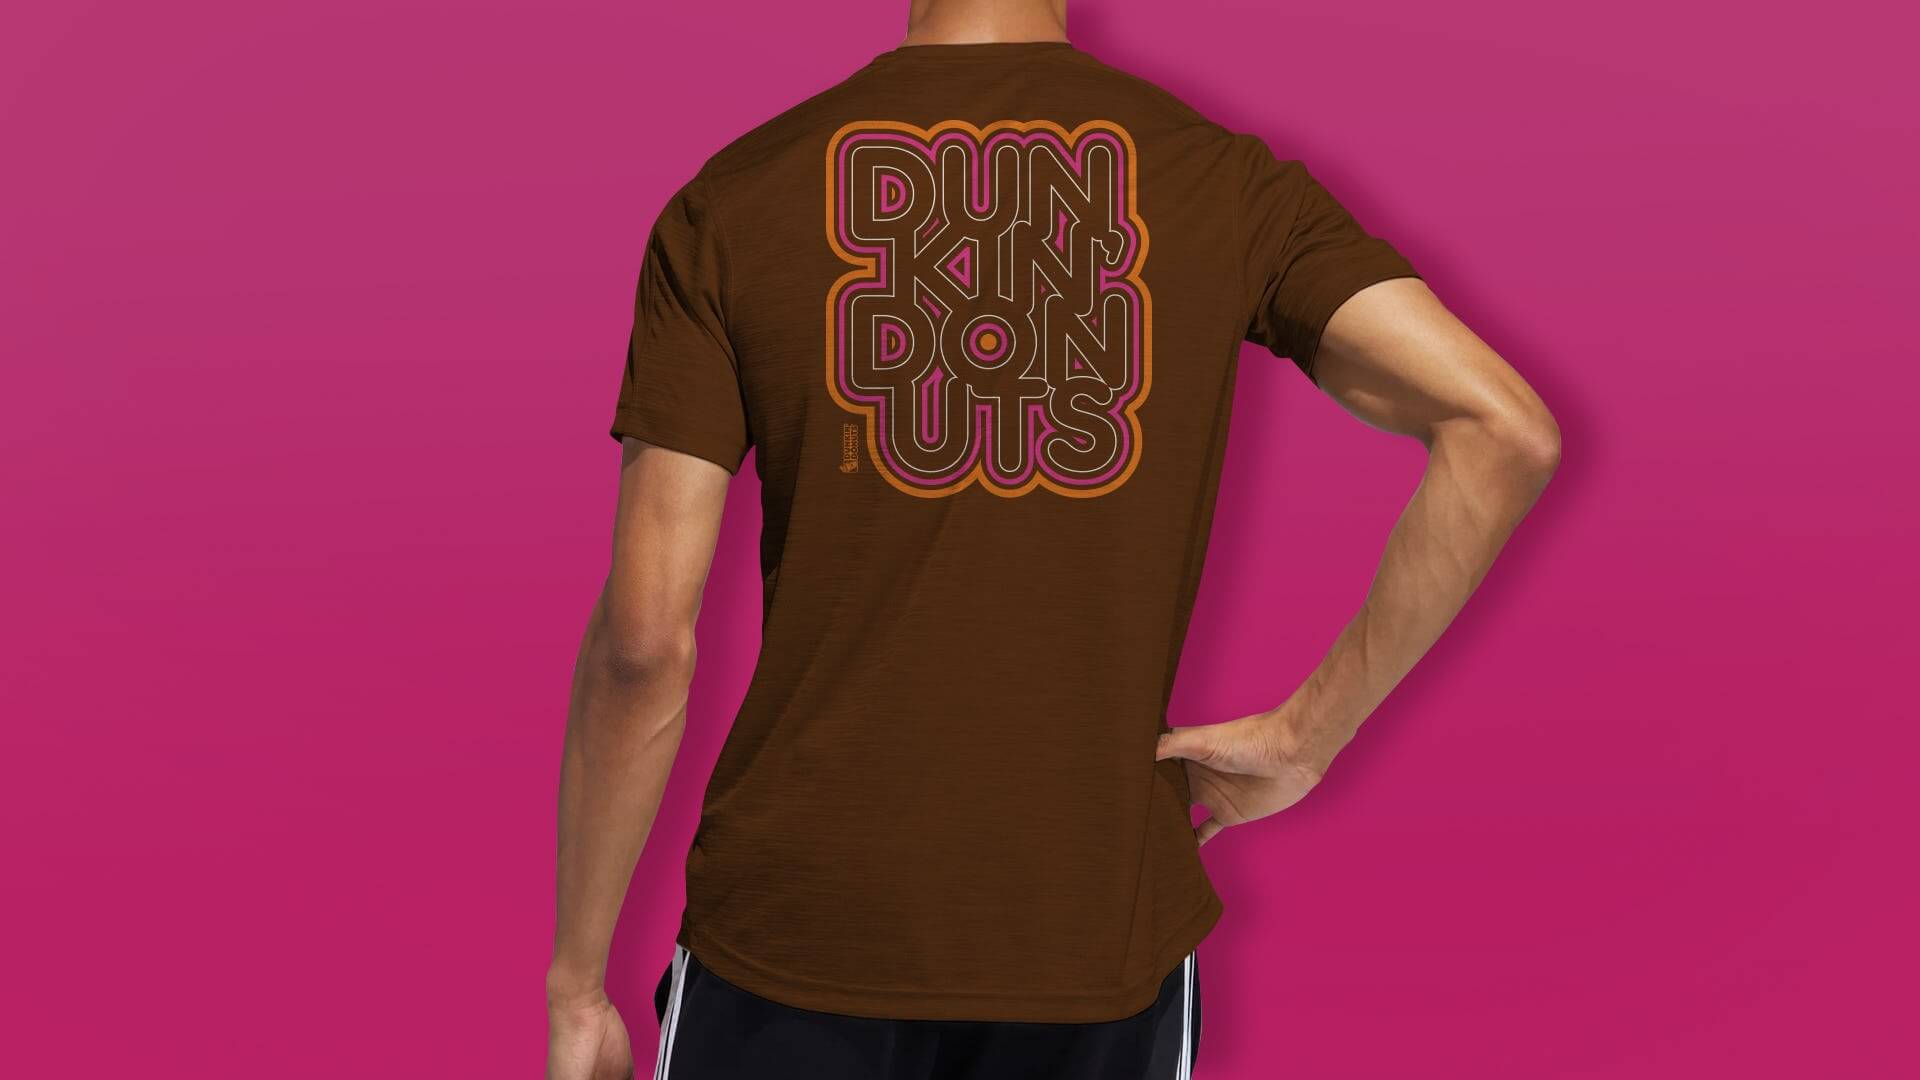 A person in a brown Dunkin' Donuts tshirt